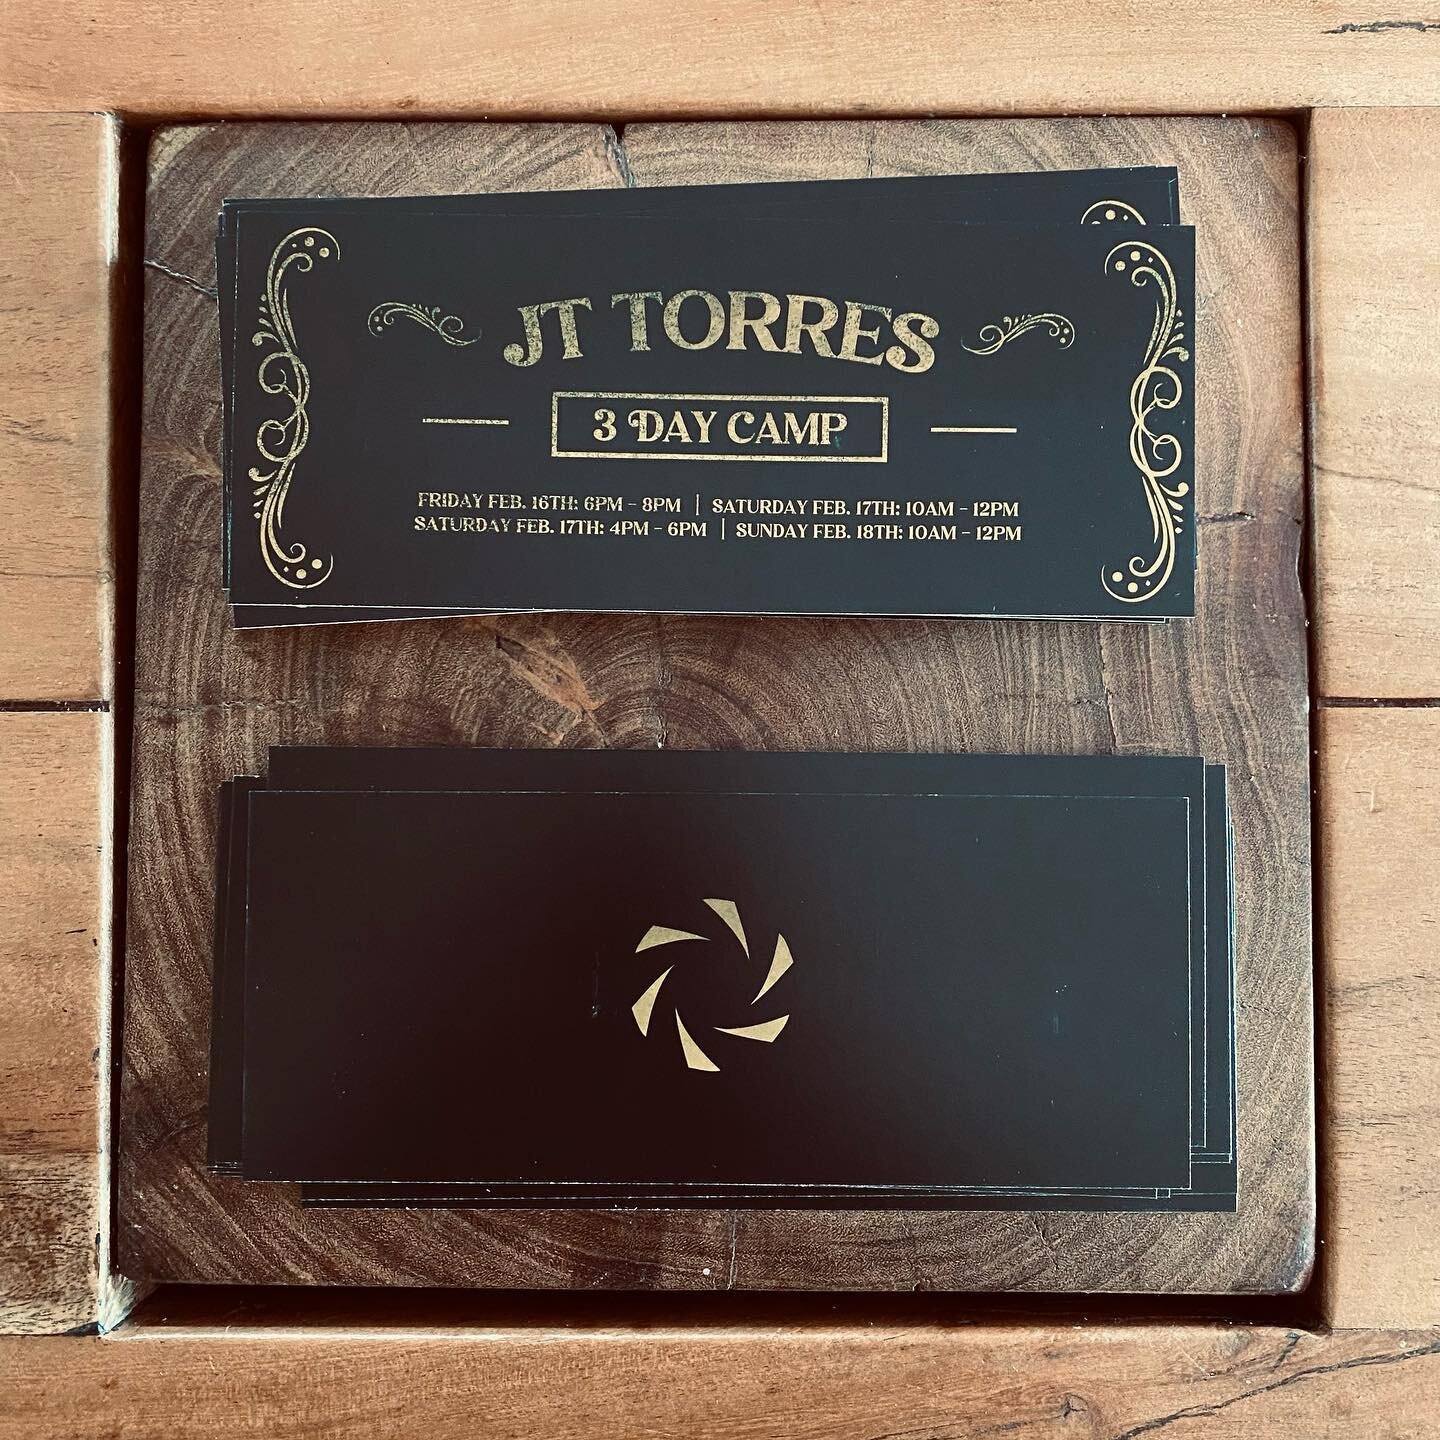 On Black Friday we are releasing tickets to our 3-Day JT Torres camp.  We are limiting this event to 75 tickets - and no spectators - to ensure the quality and organization of this event.

Only $225 for one of these beautiful 3.5&rdquo; x 8.5&rdquo; 